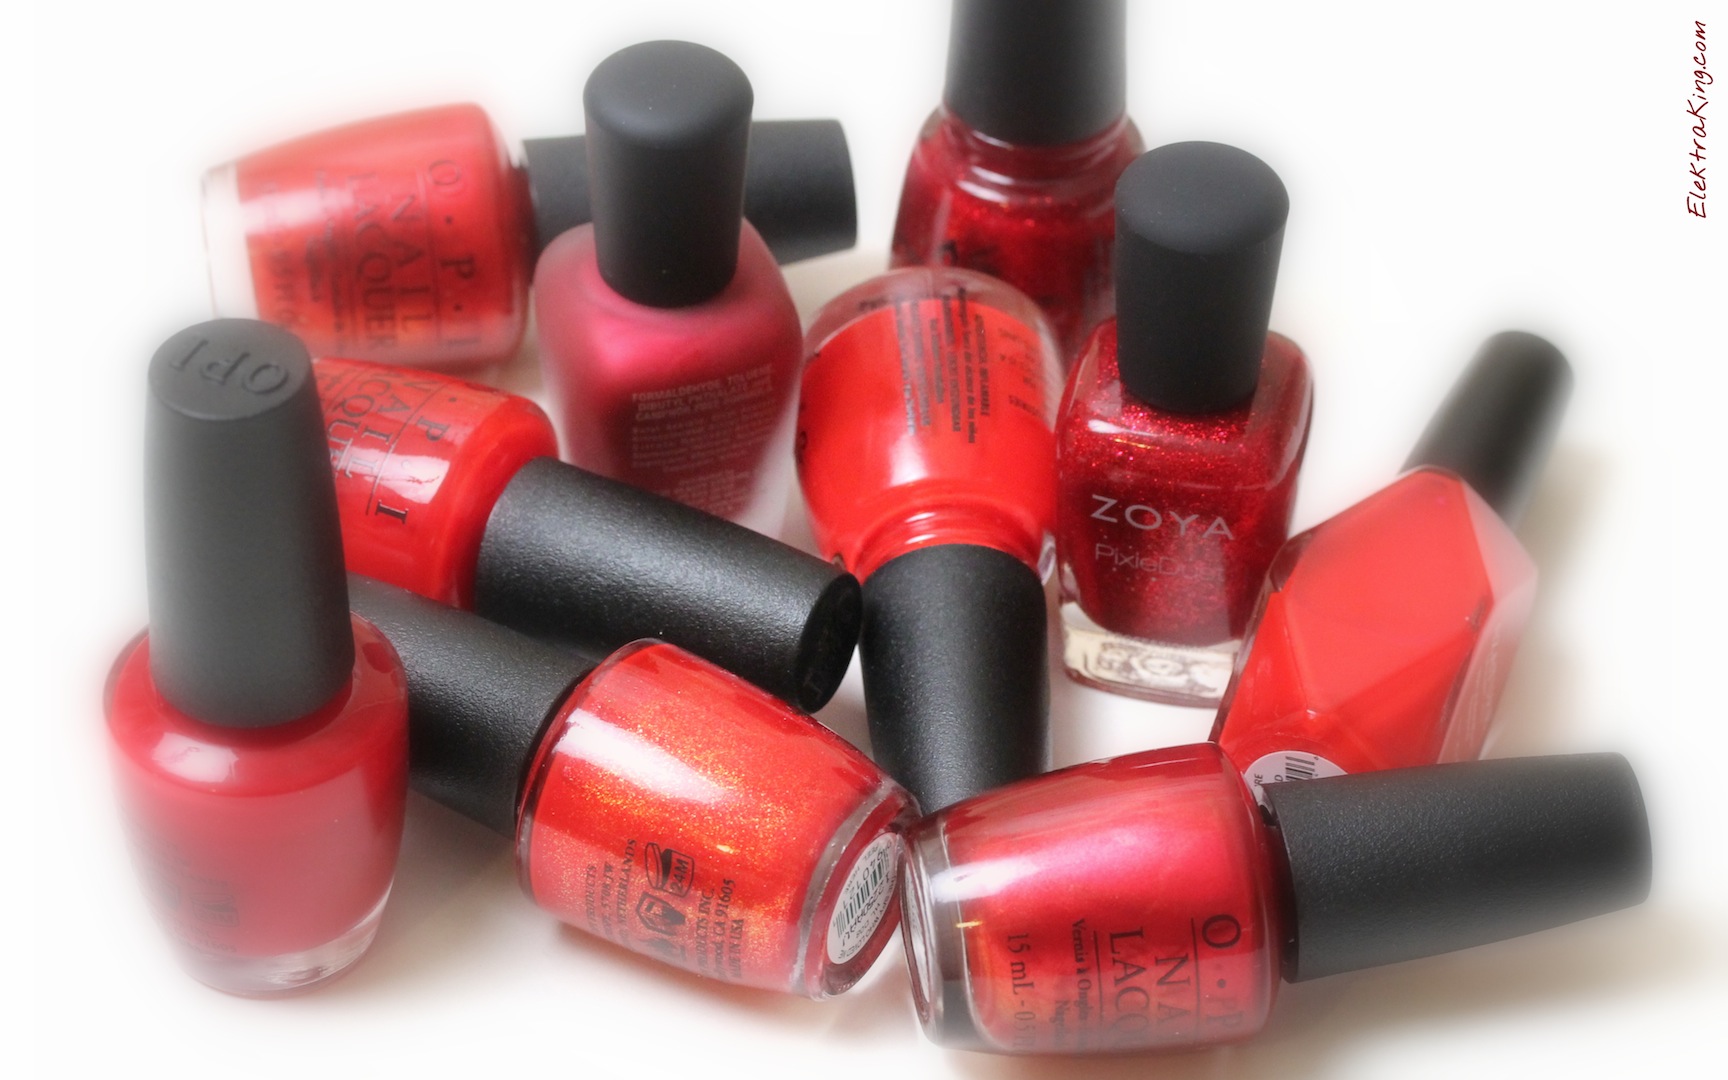 Holiday Red Polishes